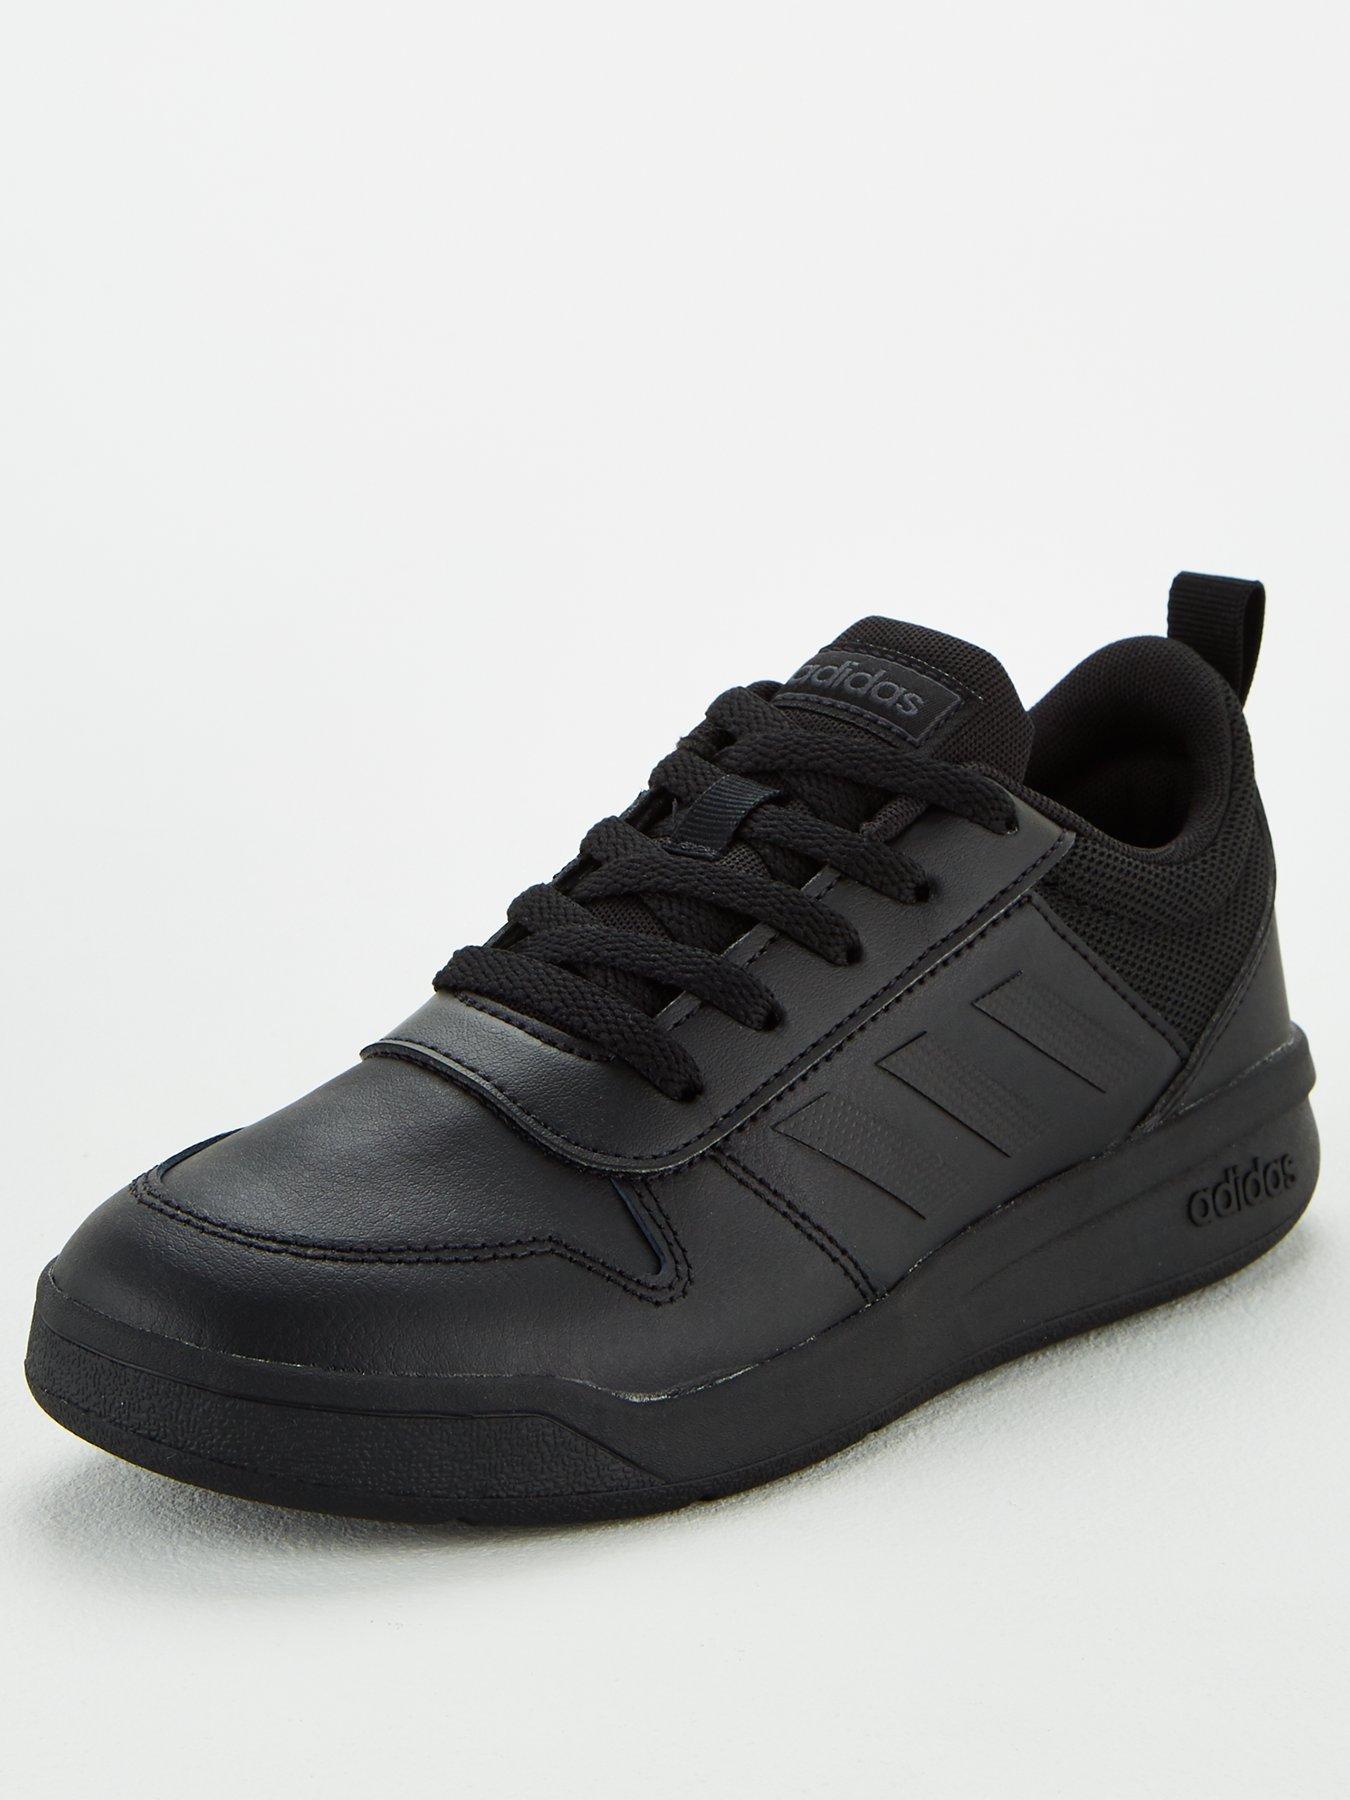 boys trainers 9.5